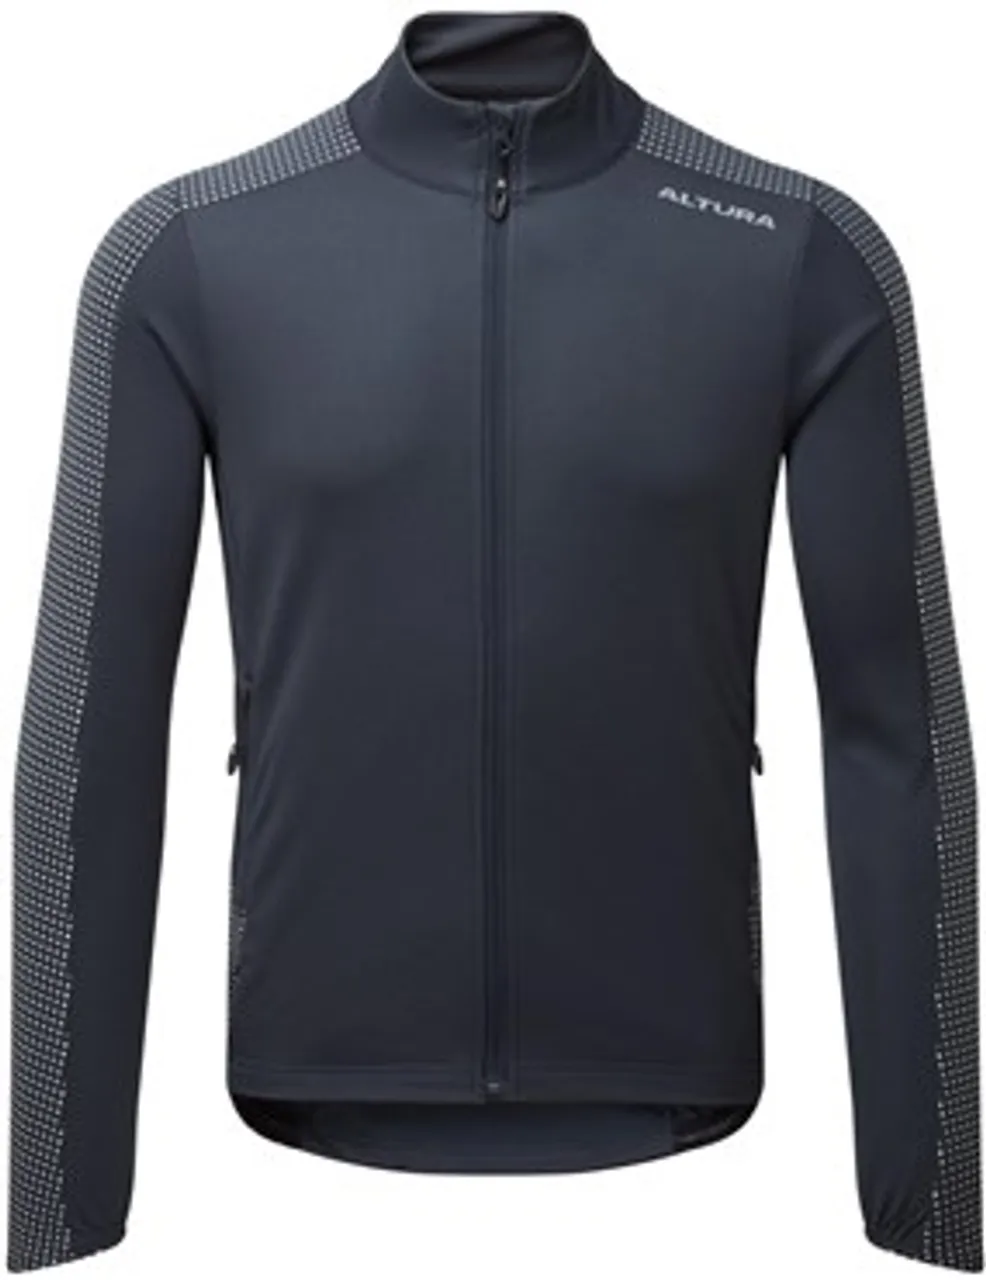 Altura Nightvision Long Sleeve Jersey